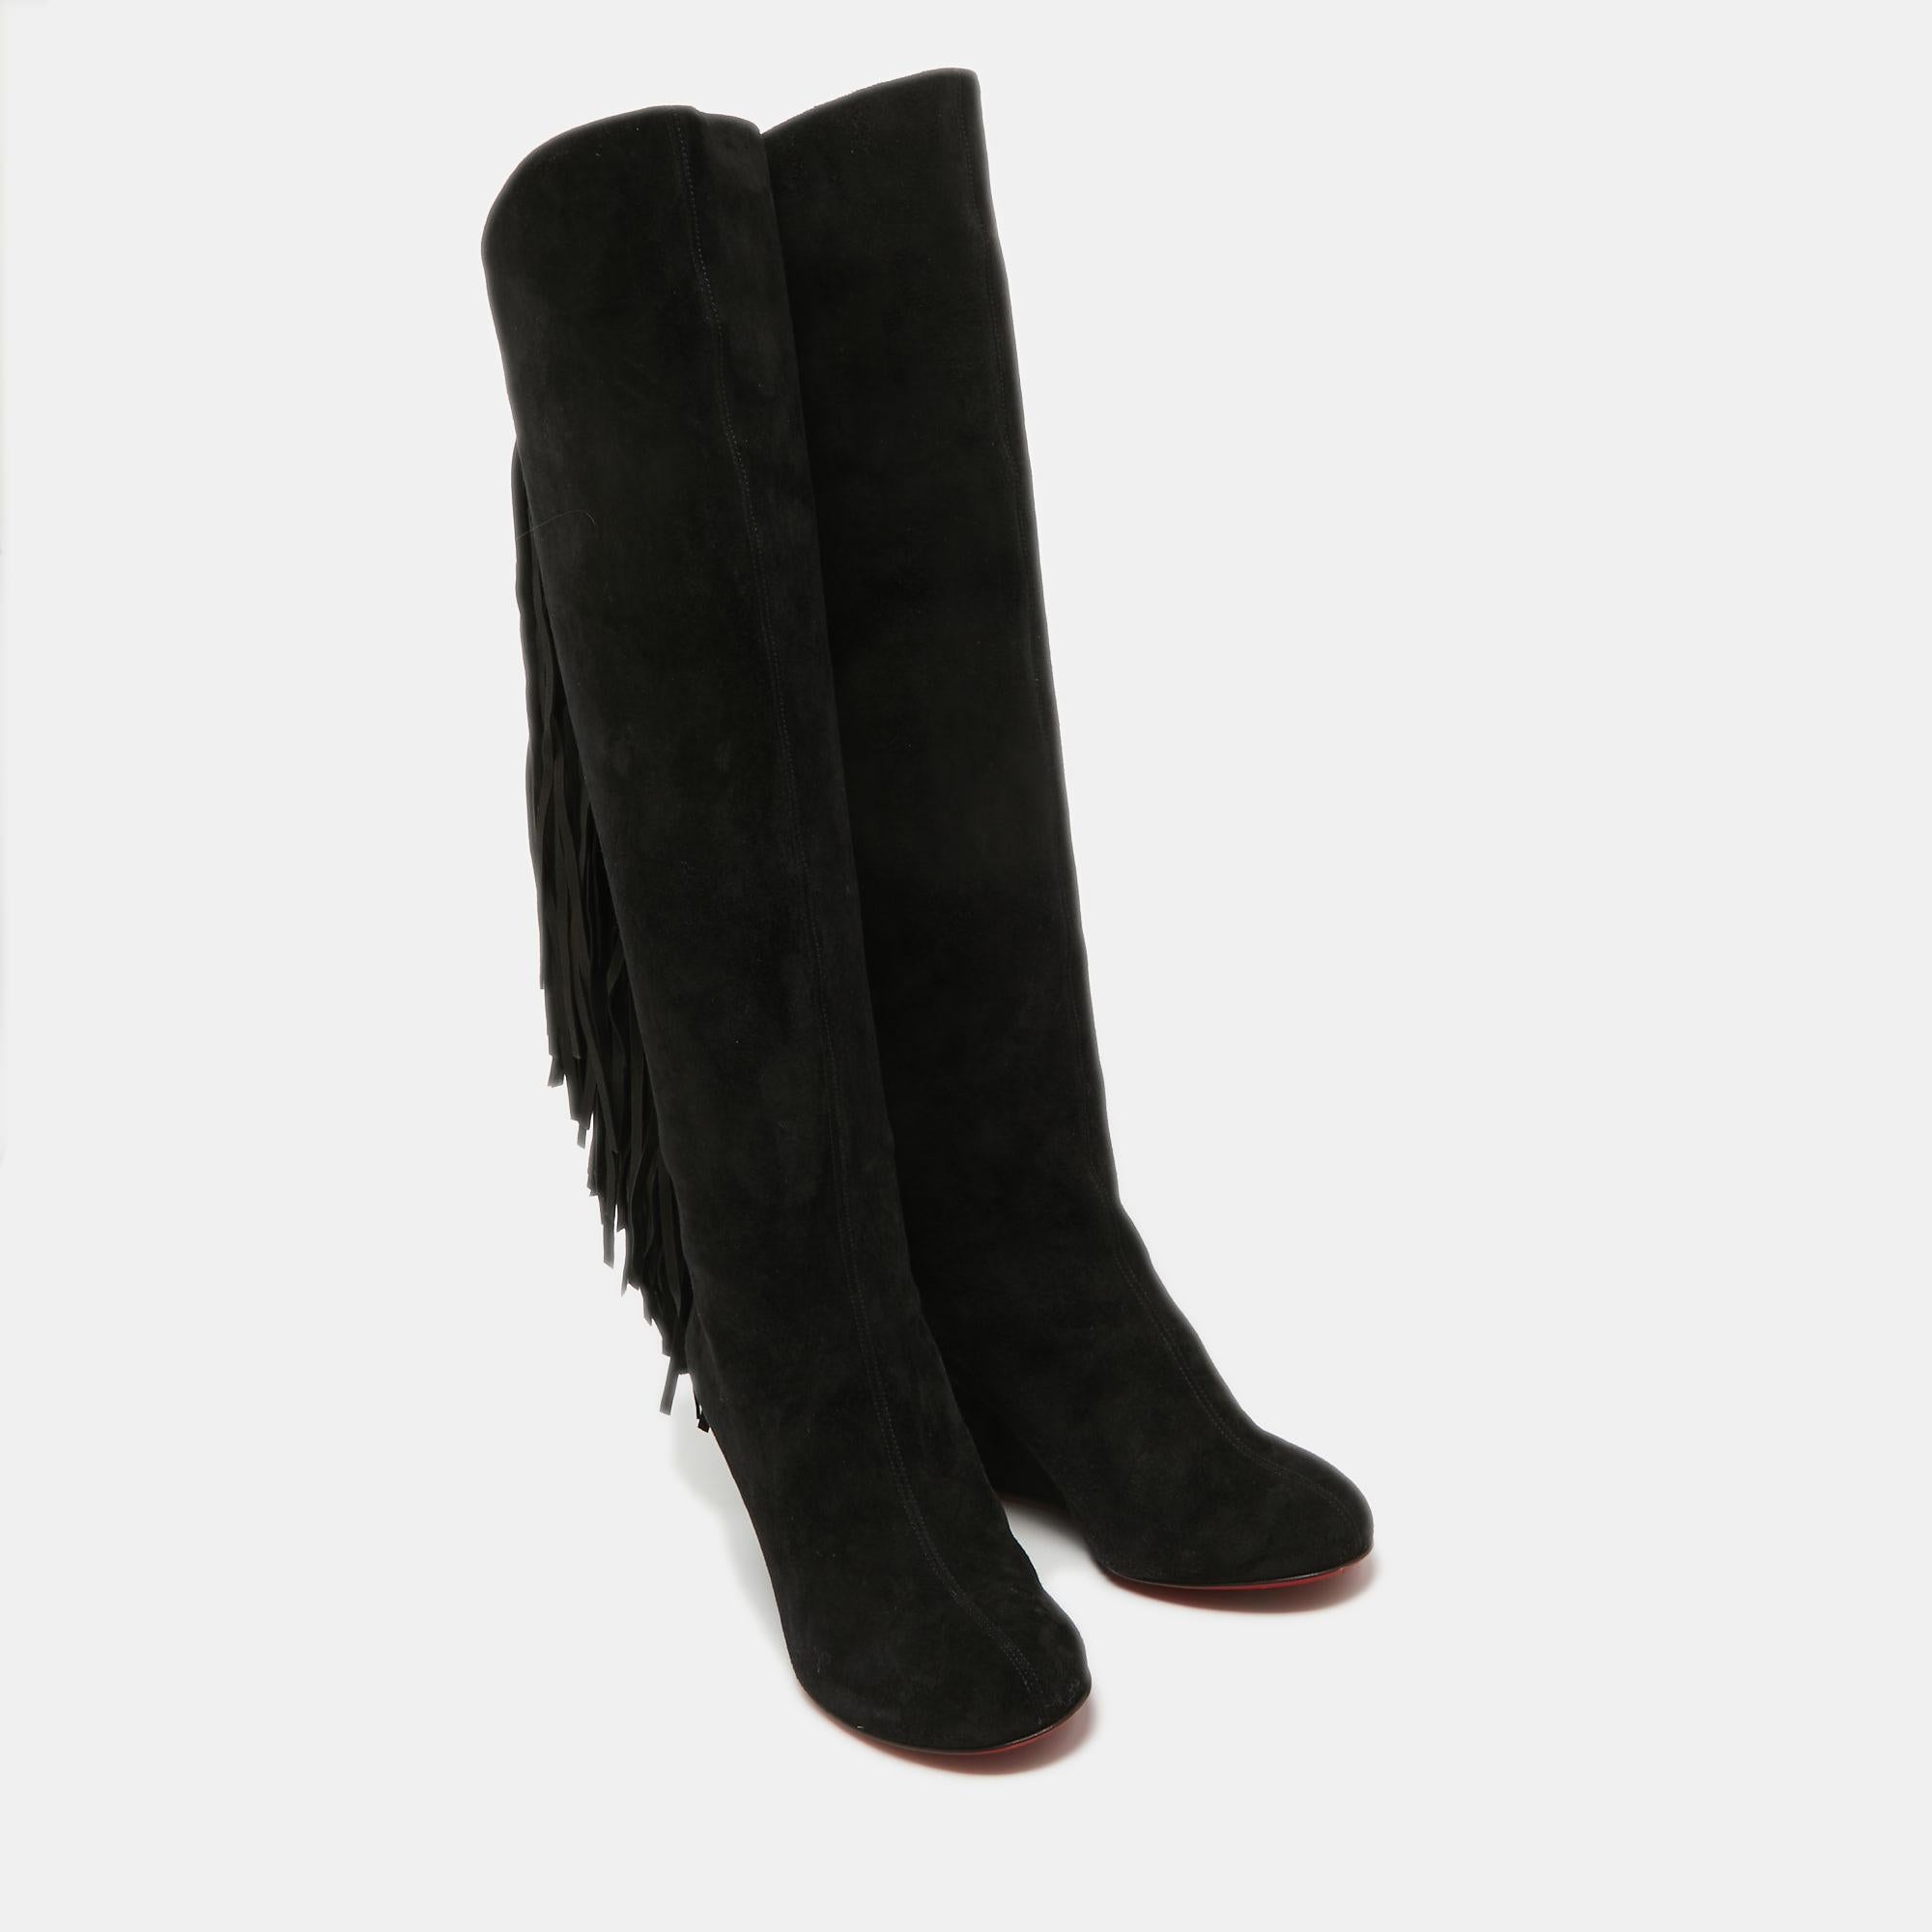 Christian Louboutin Black Suede Knee Length Boots Size 36 For Sale 3